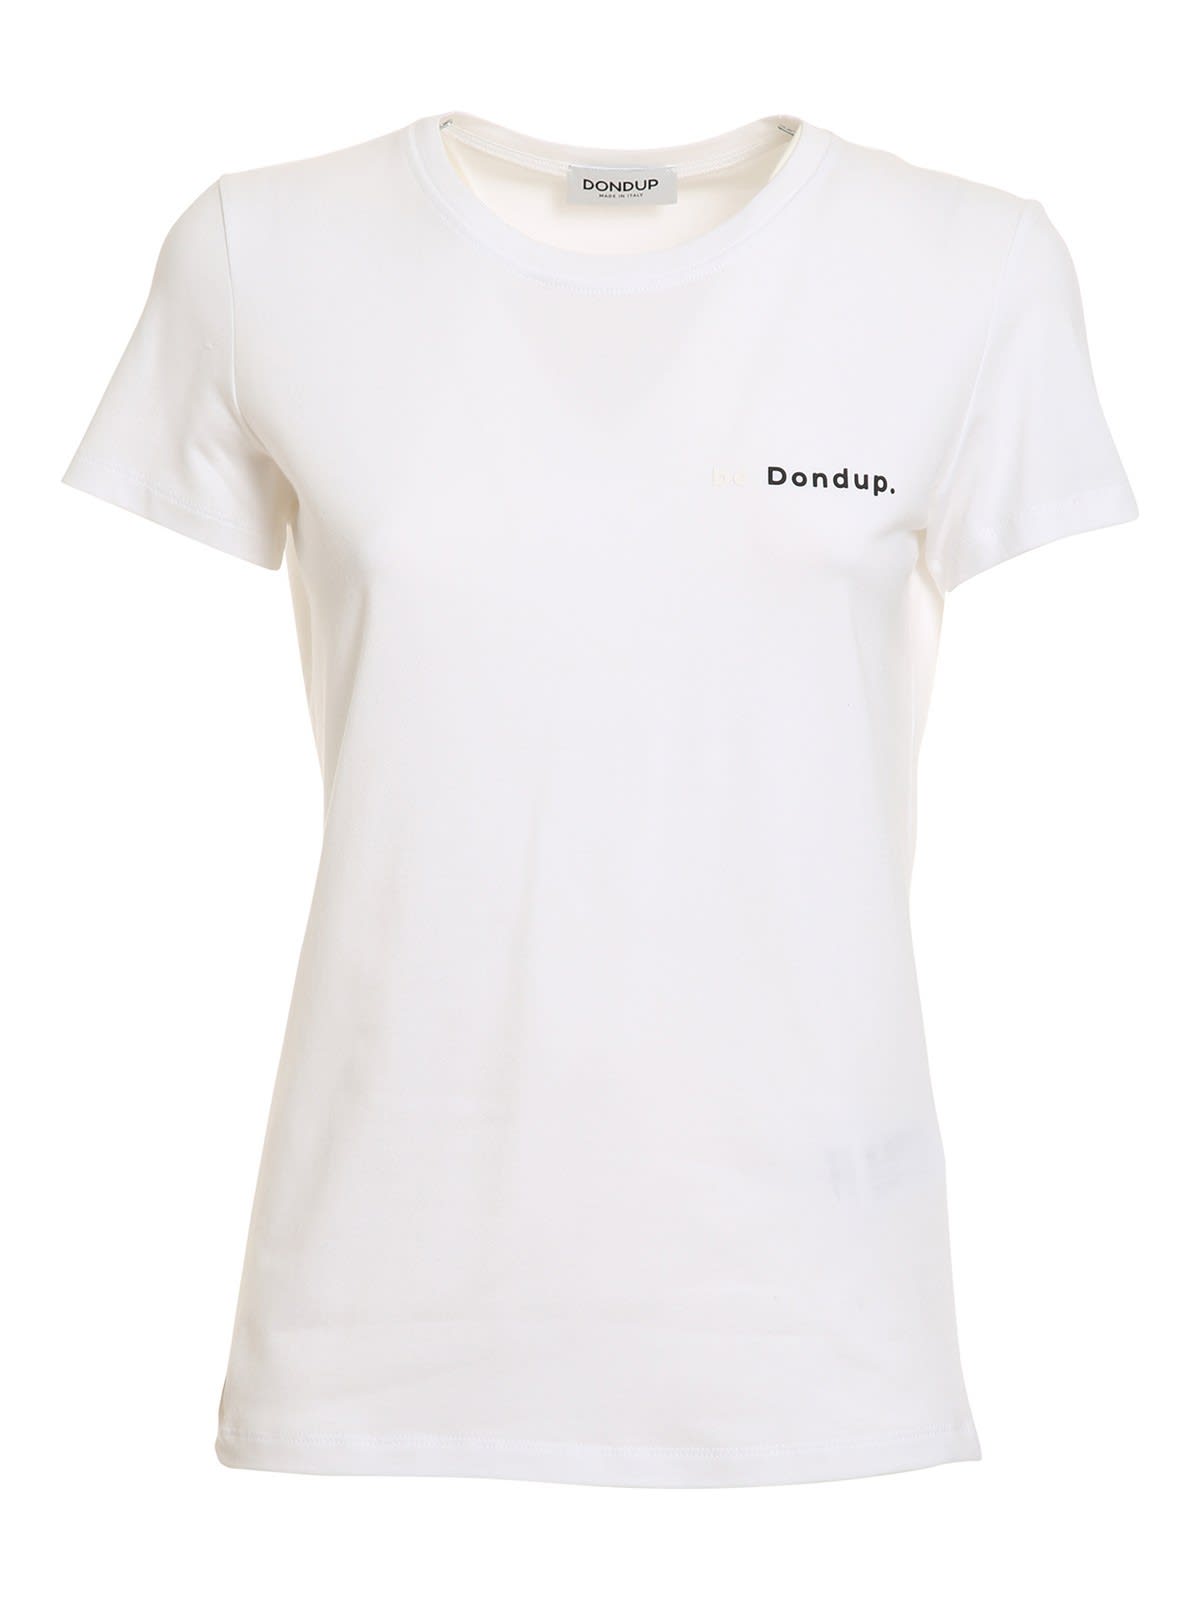 Dondup T-shirt Stampa Lettering Bianca S007js0241dco1dd000